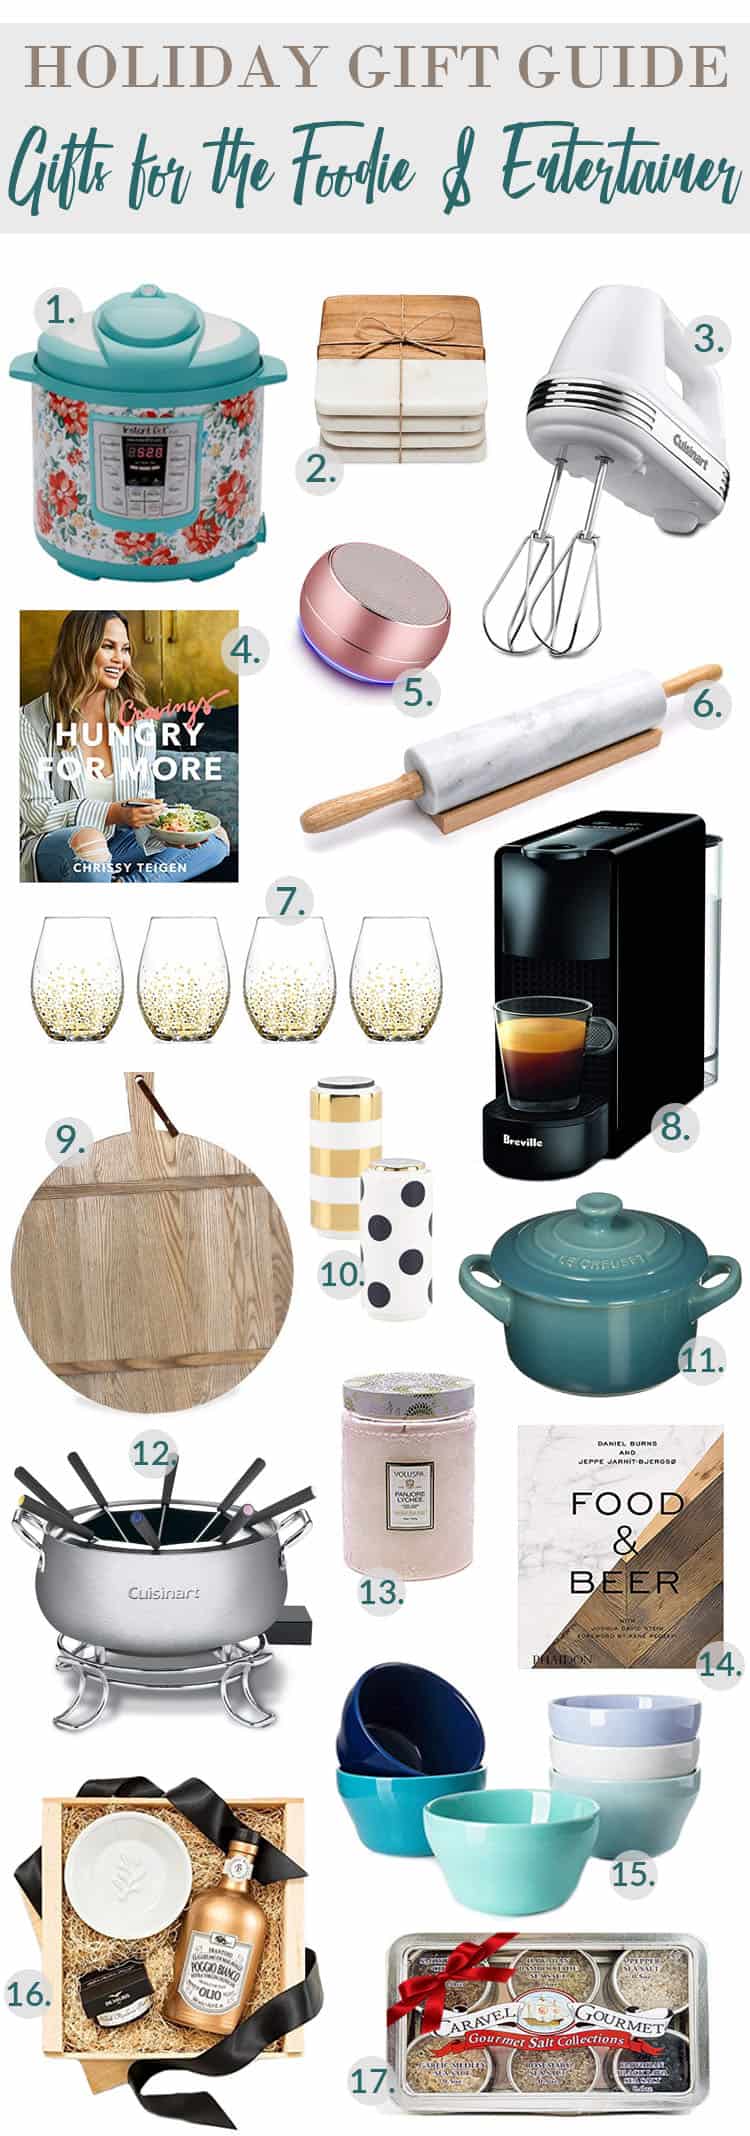 Holiday gift ideas for foodies